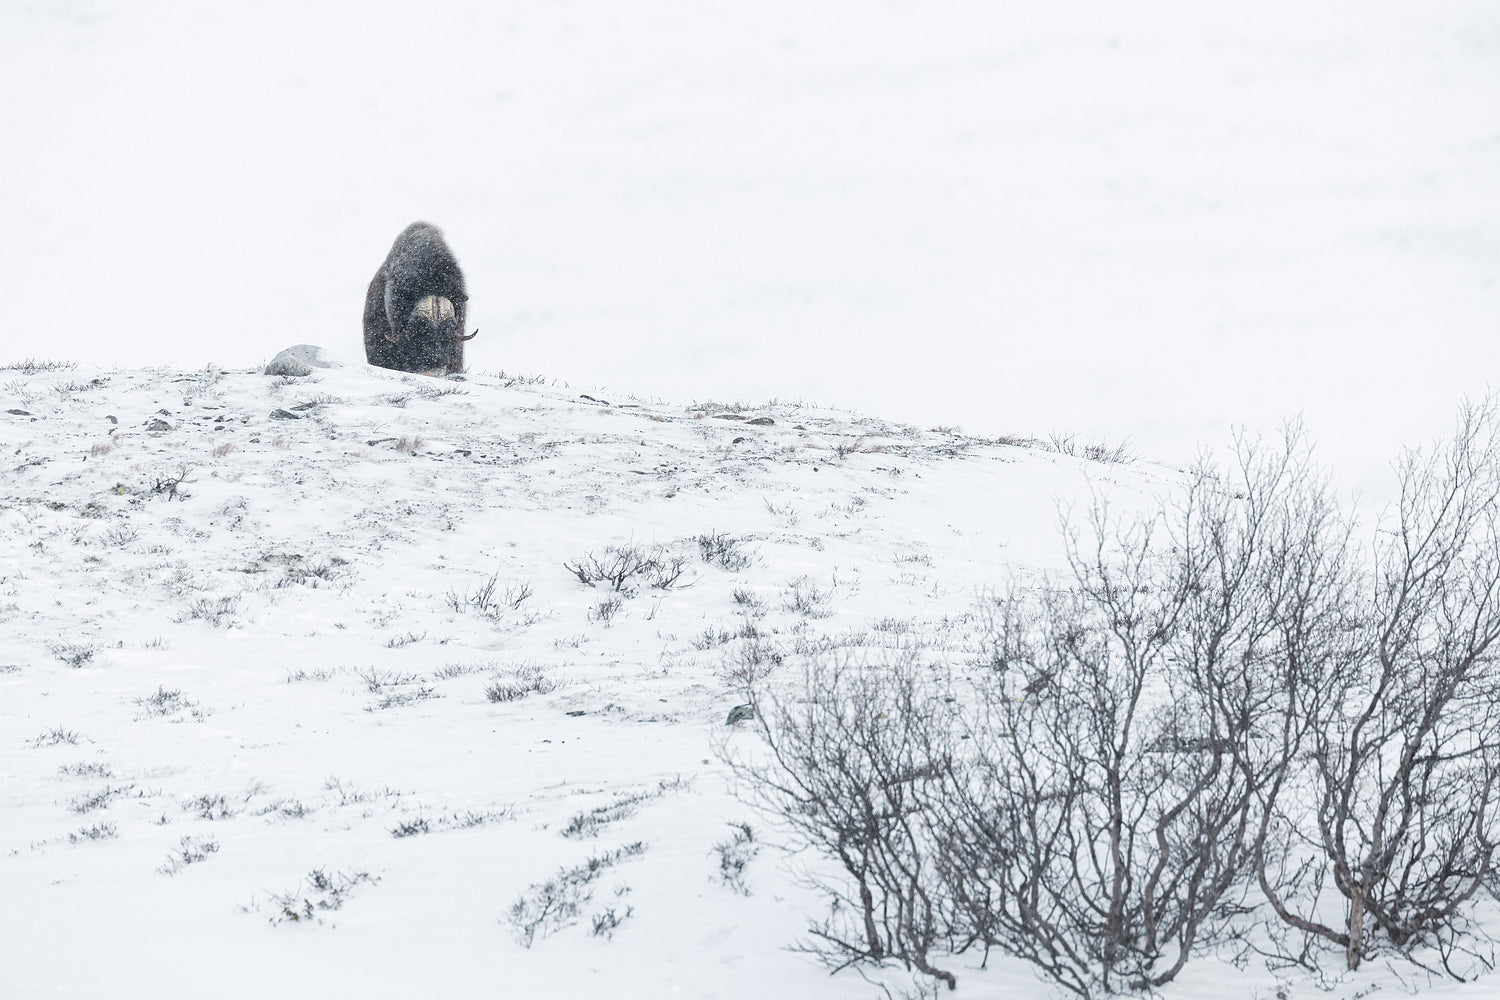 Musk Ox in Dovre mountains in the extreme winter and snow blizzard